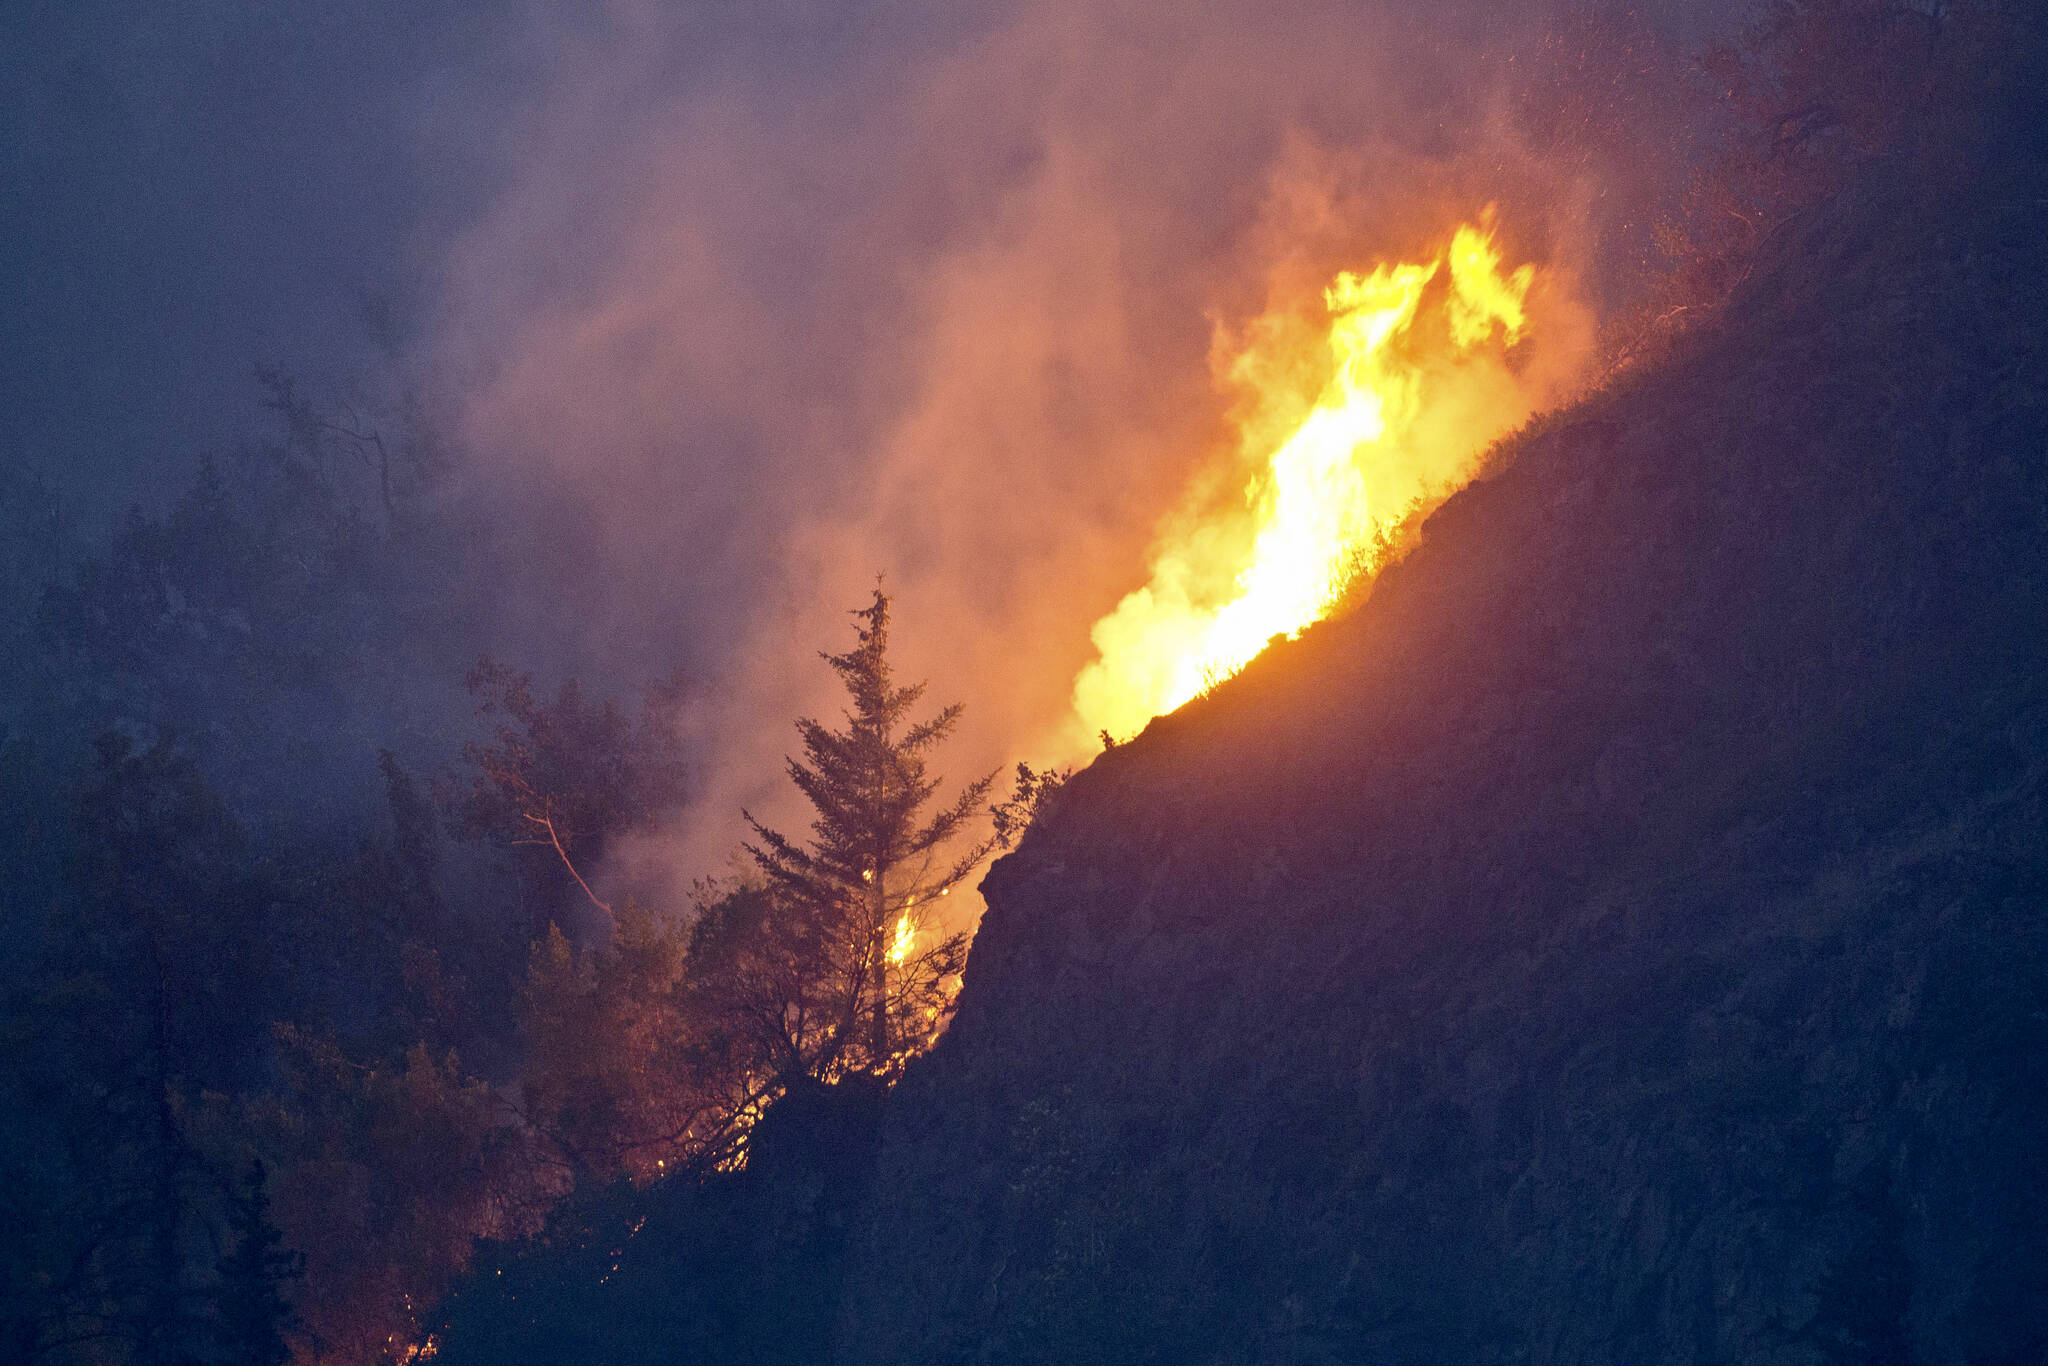 Flames are visible from the Beluga Point parking area near Anchorage on July 19, 2016, as a wildfire near McHugh Creek burns. A recent series of wildfires near Anchorage and the hottest day on record have sparked fears that a warming climate could soon mean serious, untenable blazes in urban areas — just like in the rest of the drought-plagued American West. (Marc Lester / Anchorage Daily News)